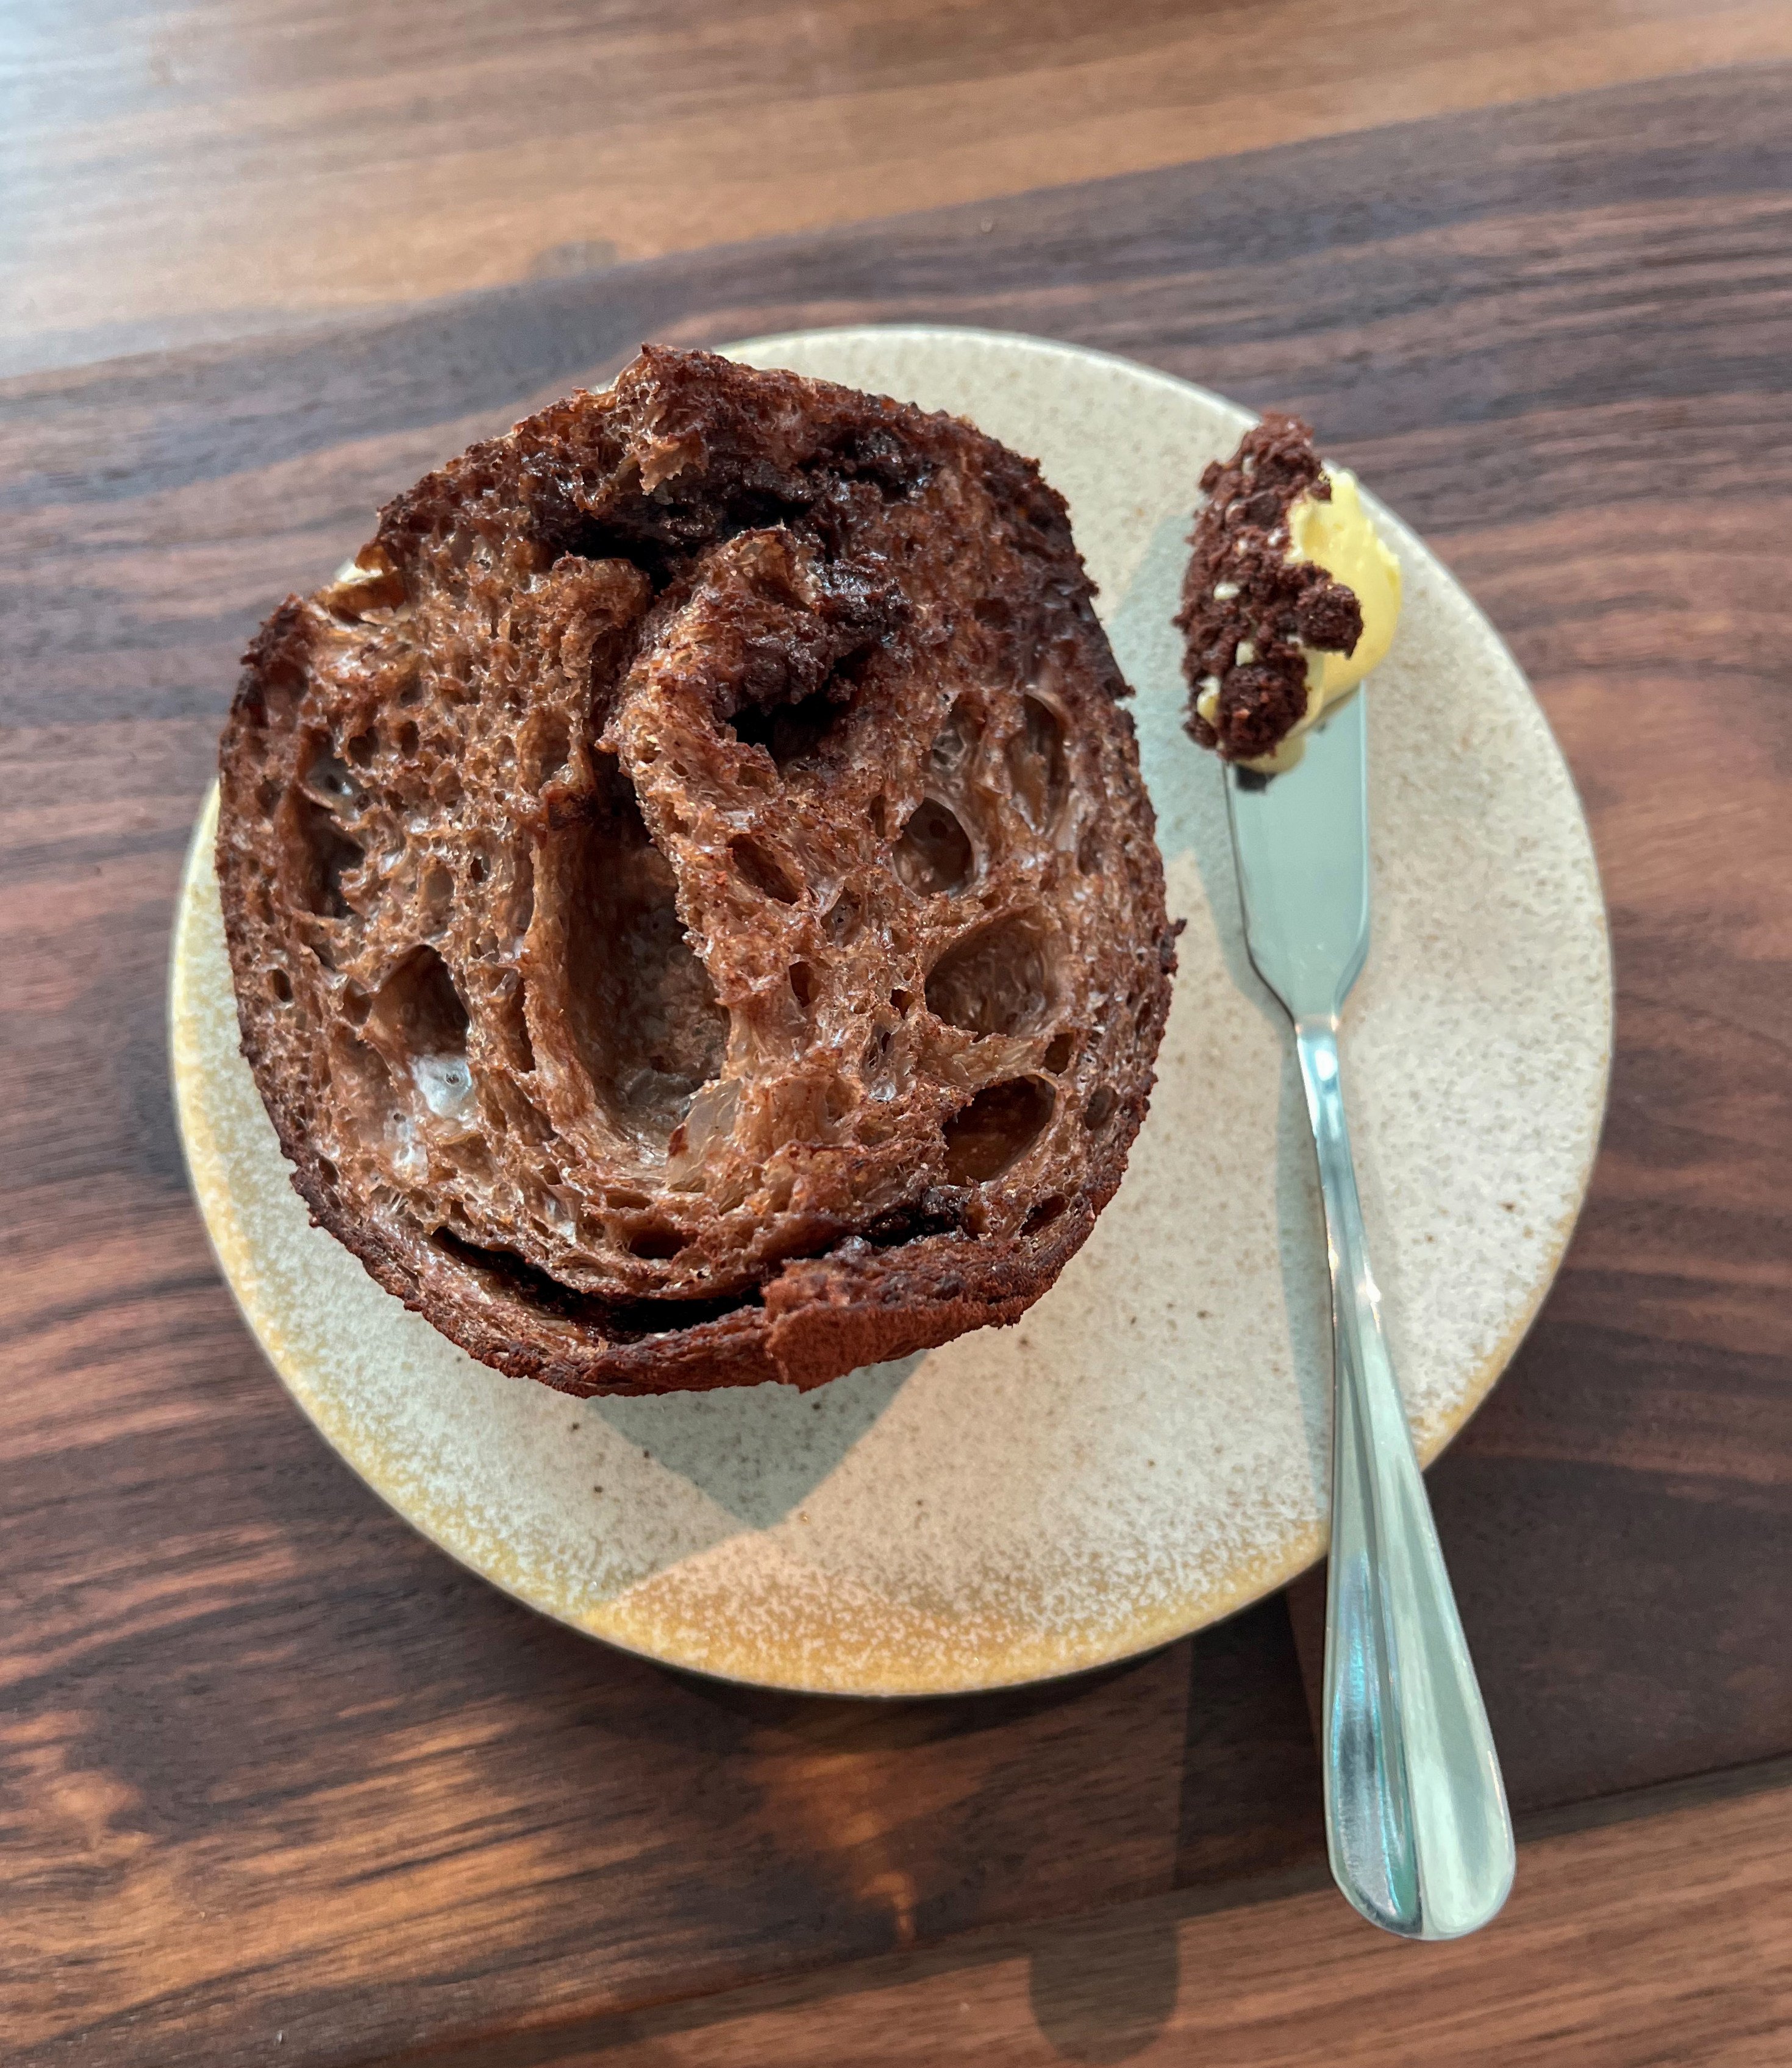 Chocolate sourdough served with a miso crumble and garlic butter is an unusual but successful combination at Otera. SCMP/Charmaine Mok